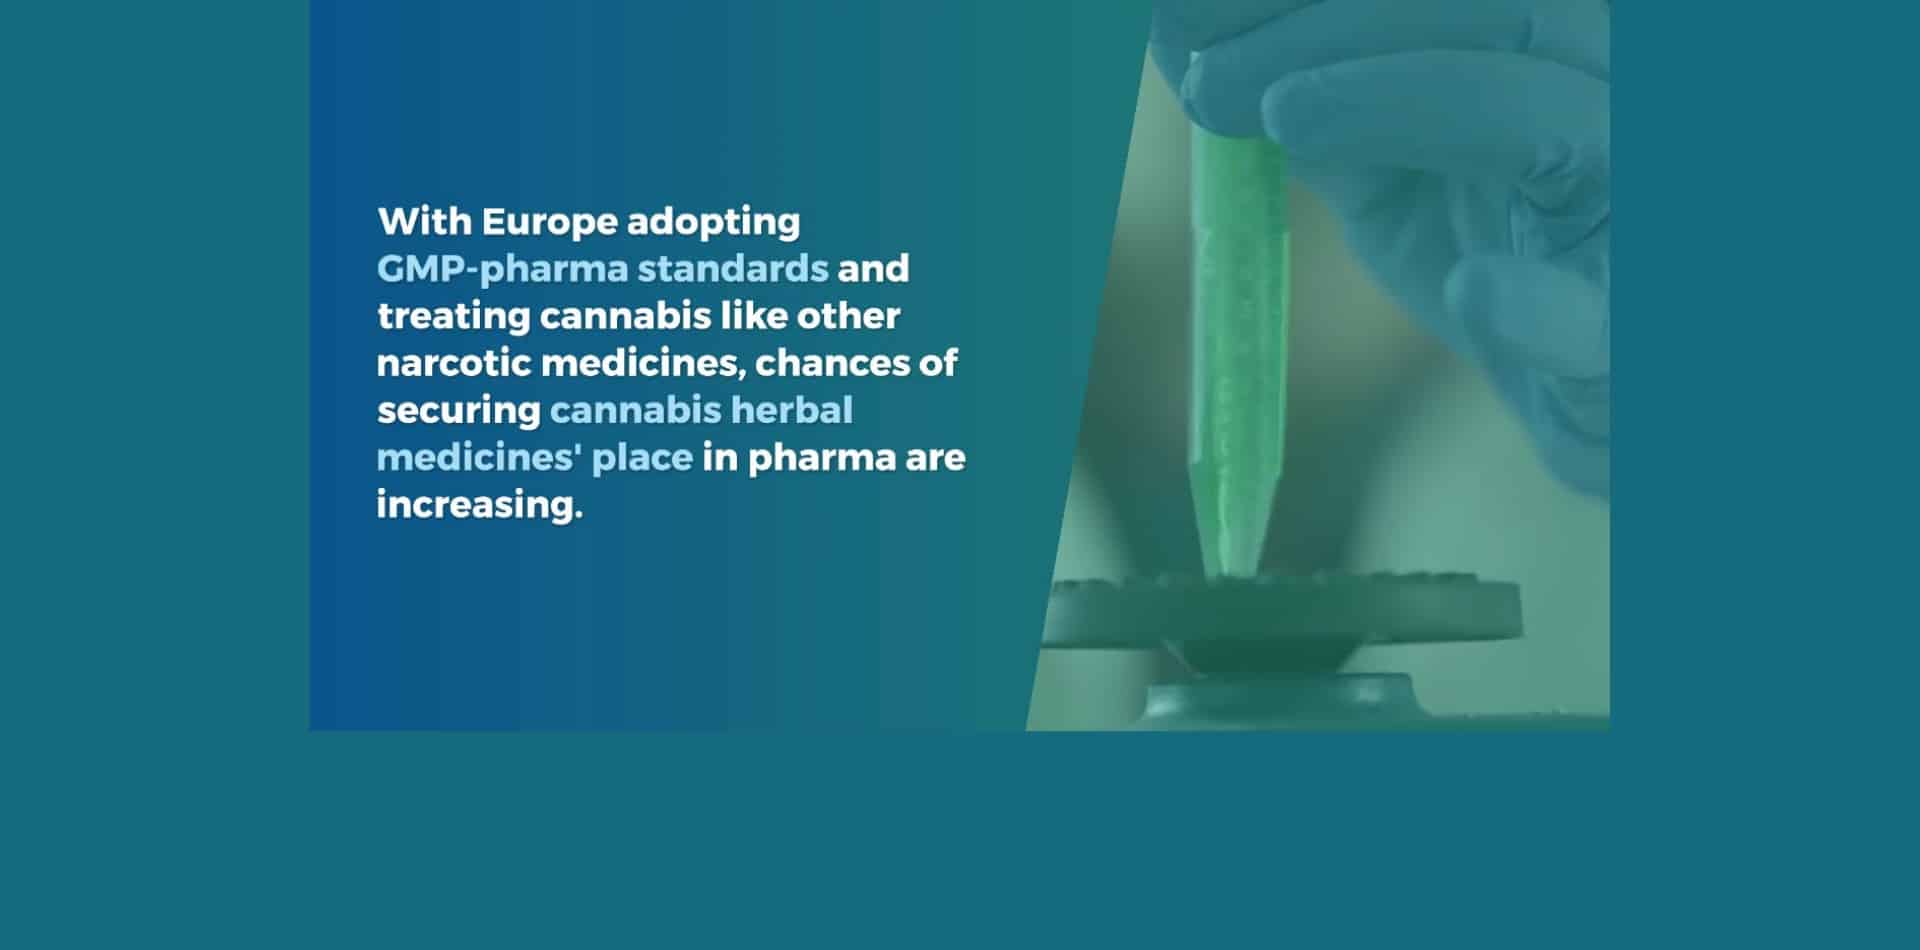 Europe’s booming cannabis industry